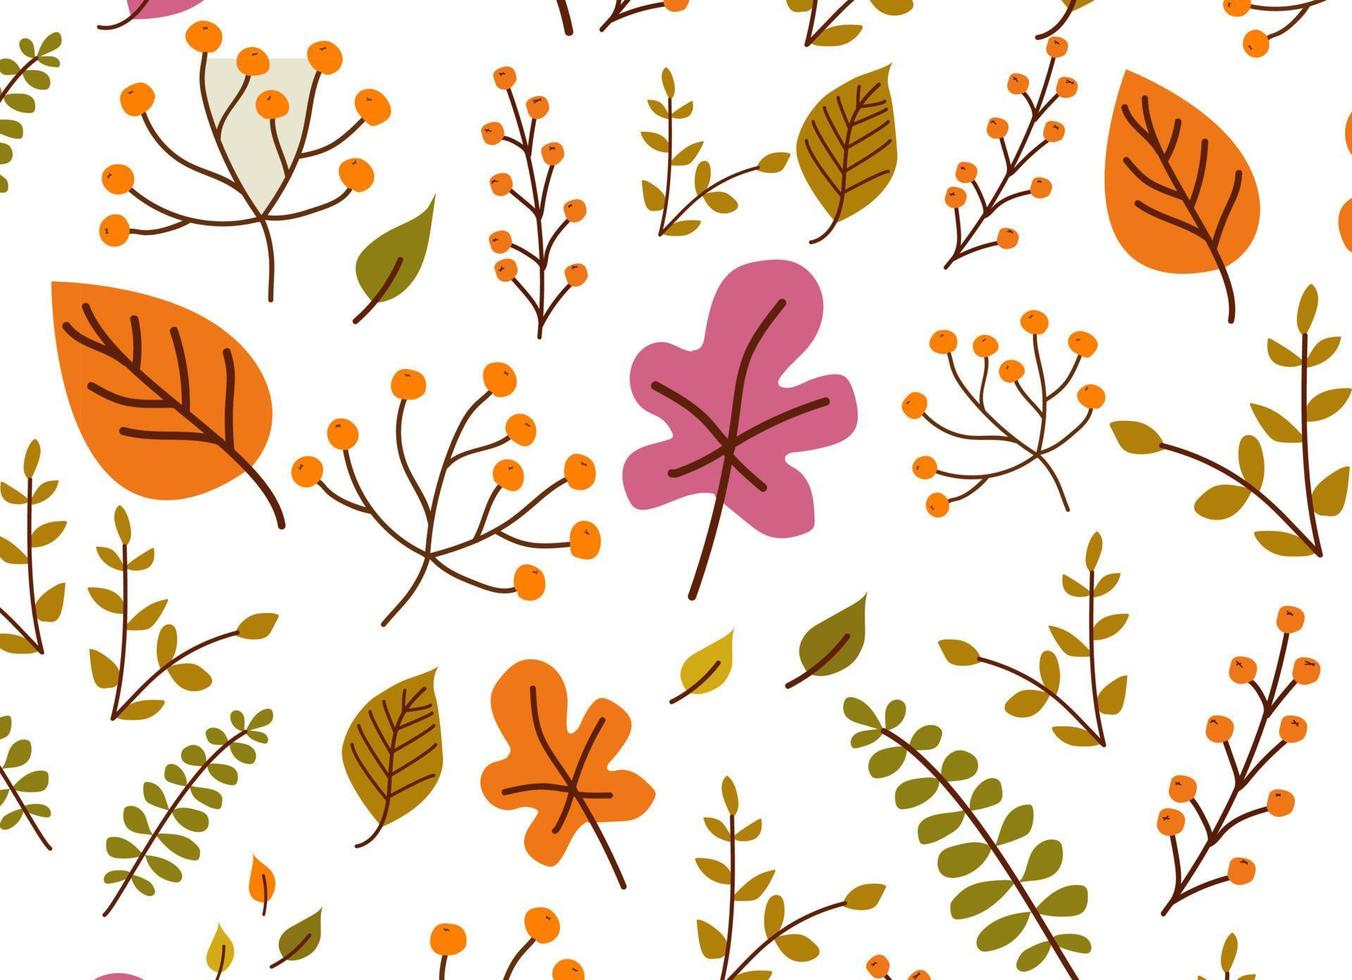 Creeper leaves pattern, Vector illustration, Cute colorful background